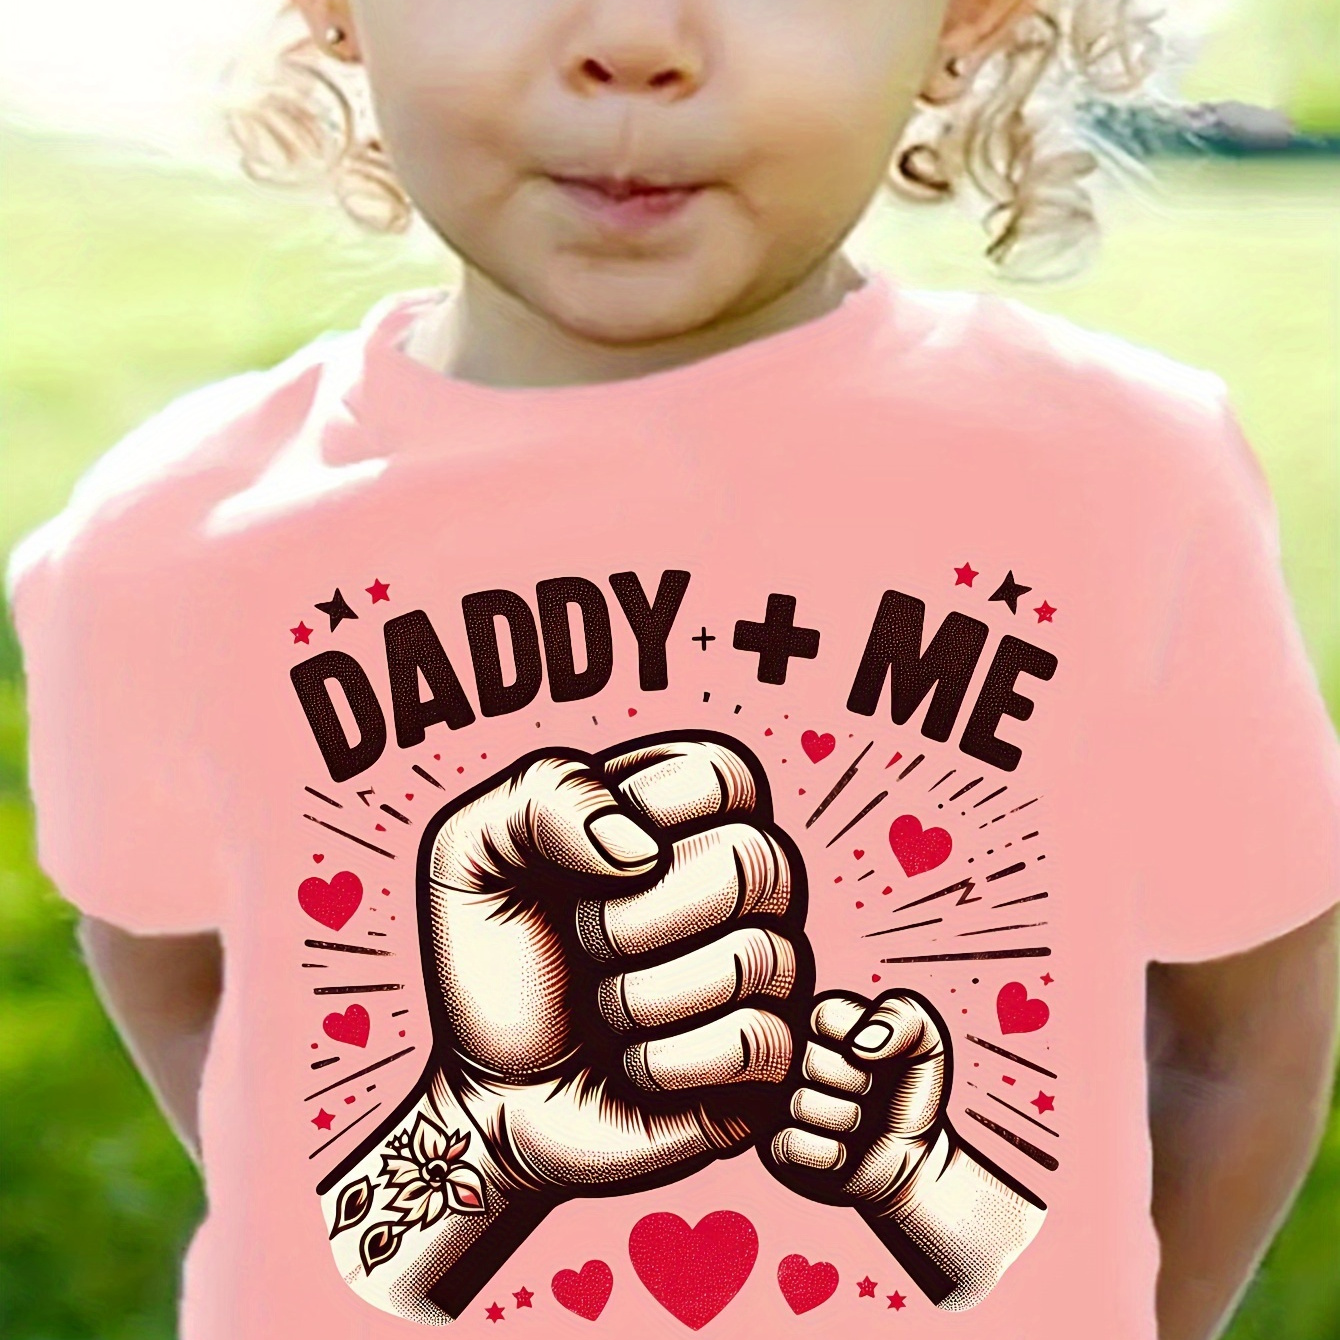 

Daddy Plus Me & Fists Graphic Print, Girls' Casual & Comfy Crew Neck Short Sleeve Tee For Spring & Summer, Girls' Clothes For Everyday Activities